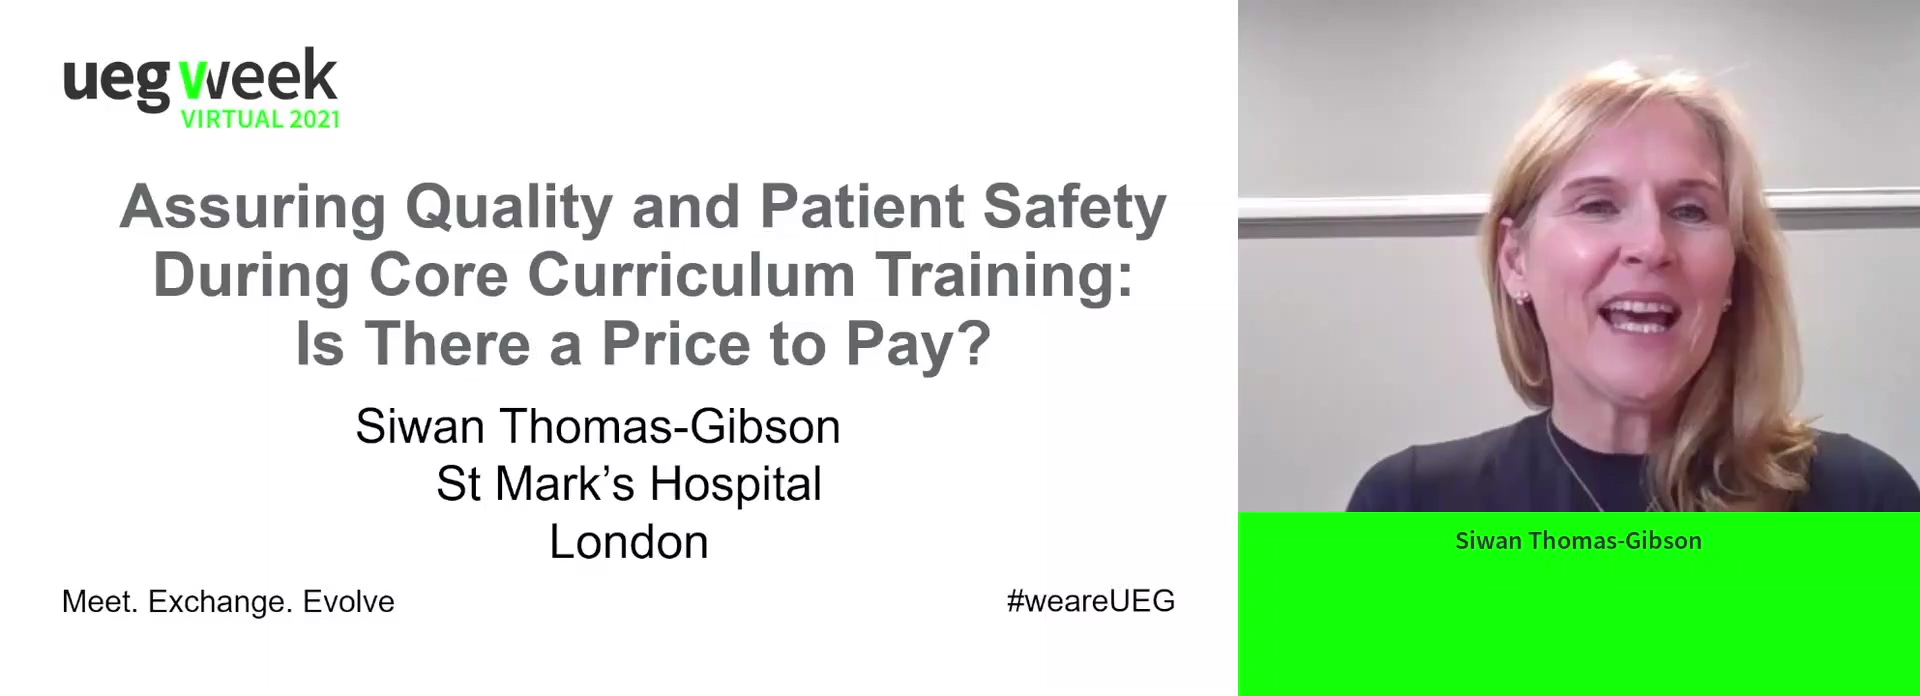 Assuring quality and patient safety during core curriculum training: Is there a price to pay?